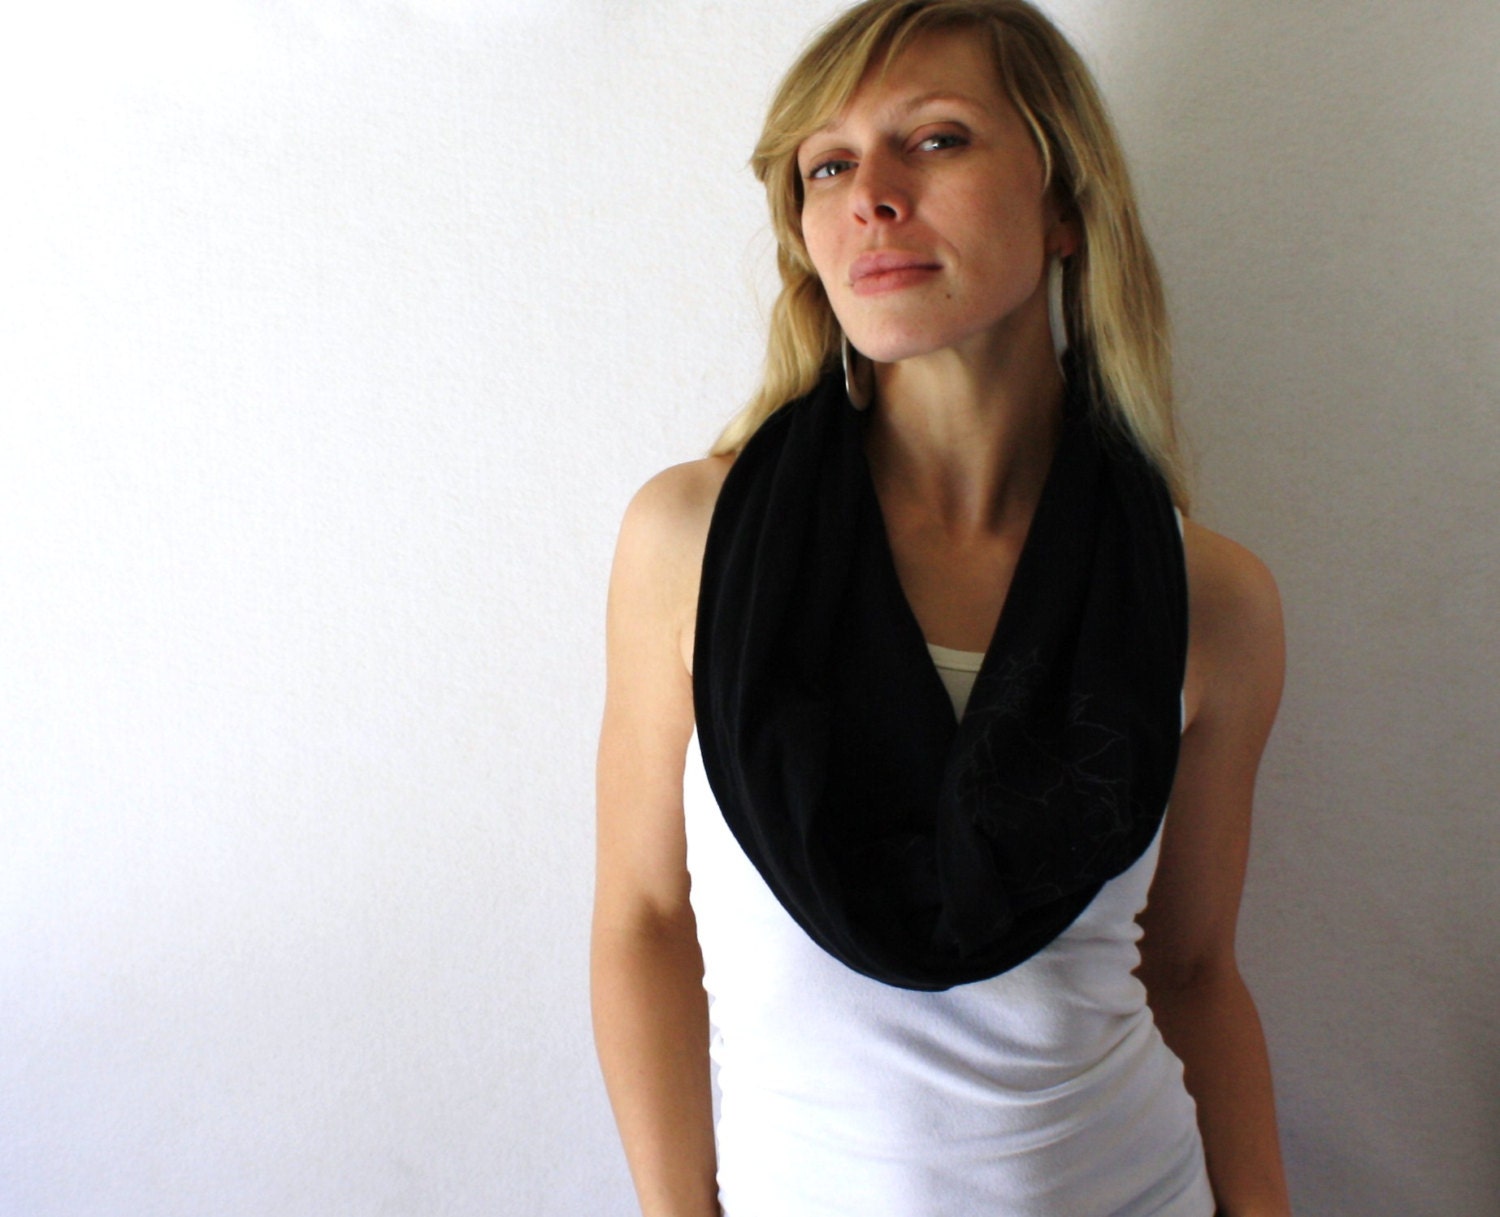 Up-cycled Black Circle Scarf -  Organic Cotton - Black Scarf  - Infinity Scarf - Loop Scarf - Spring Fashion - TheSilkMoon